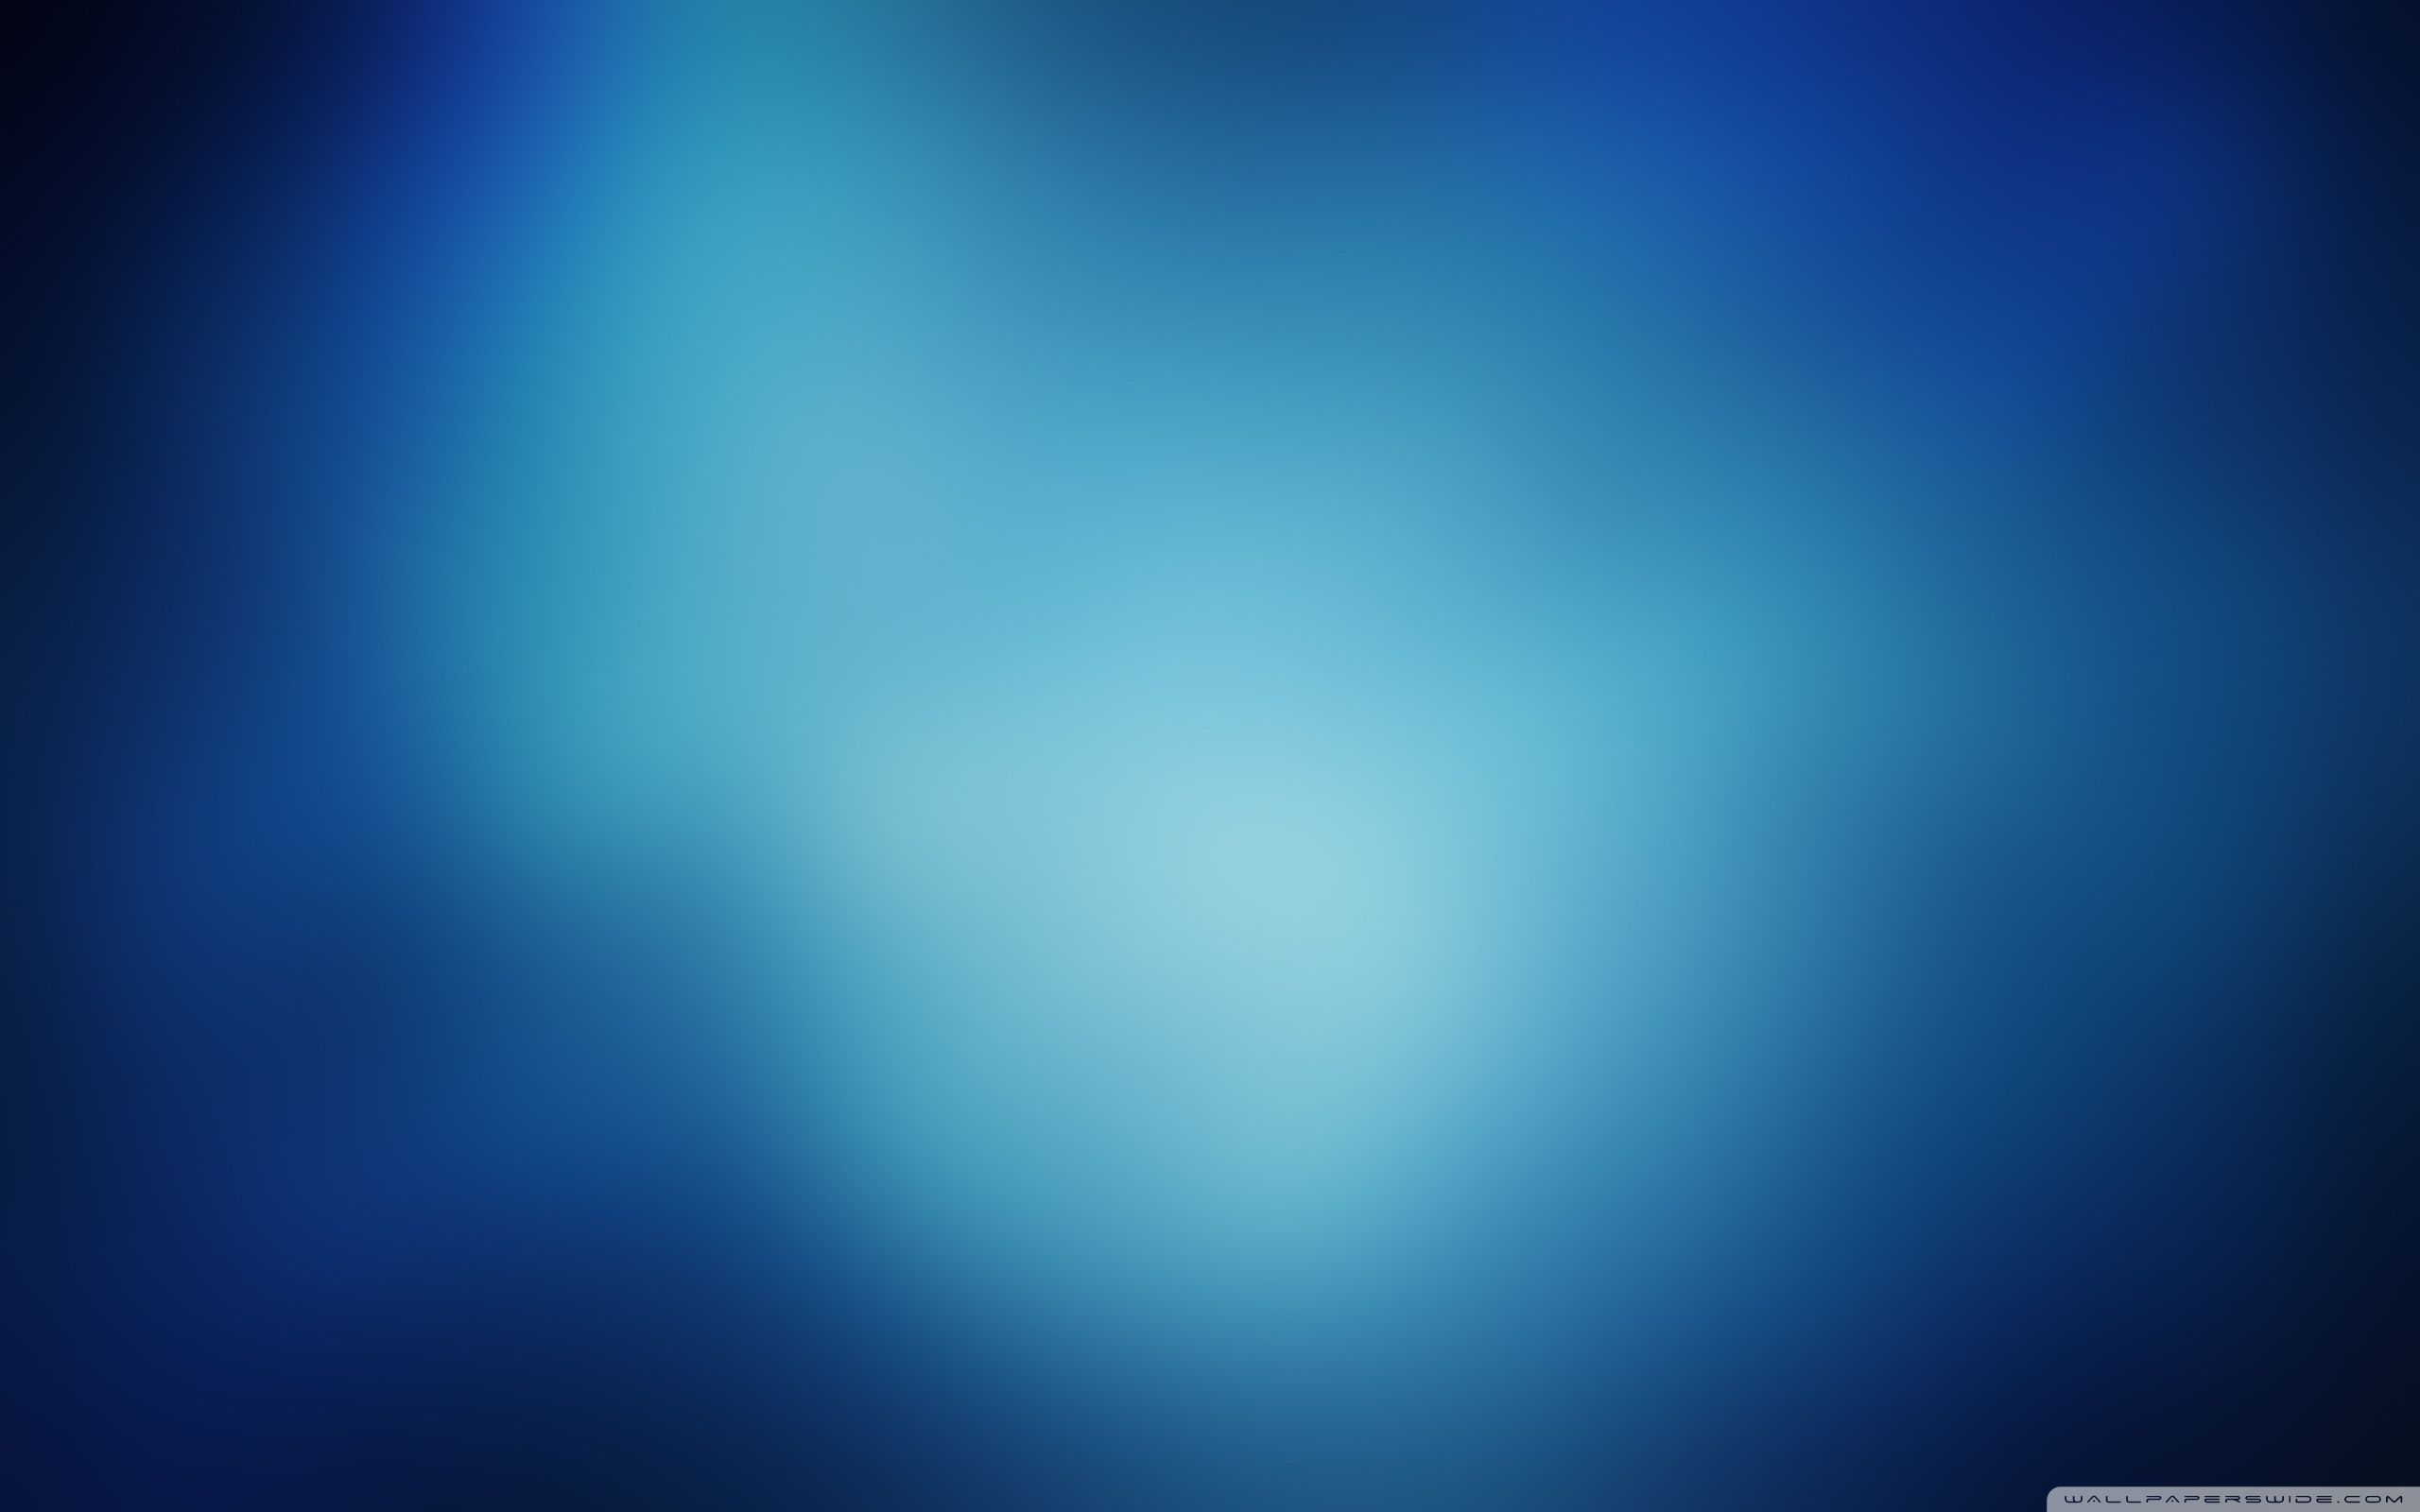 Cool Blue Gradient Background Puter Wallpaper In